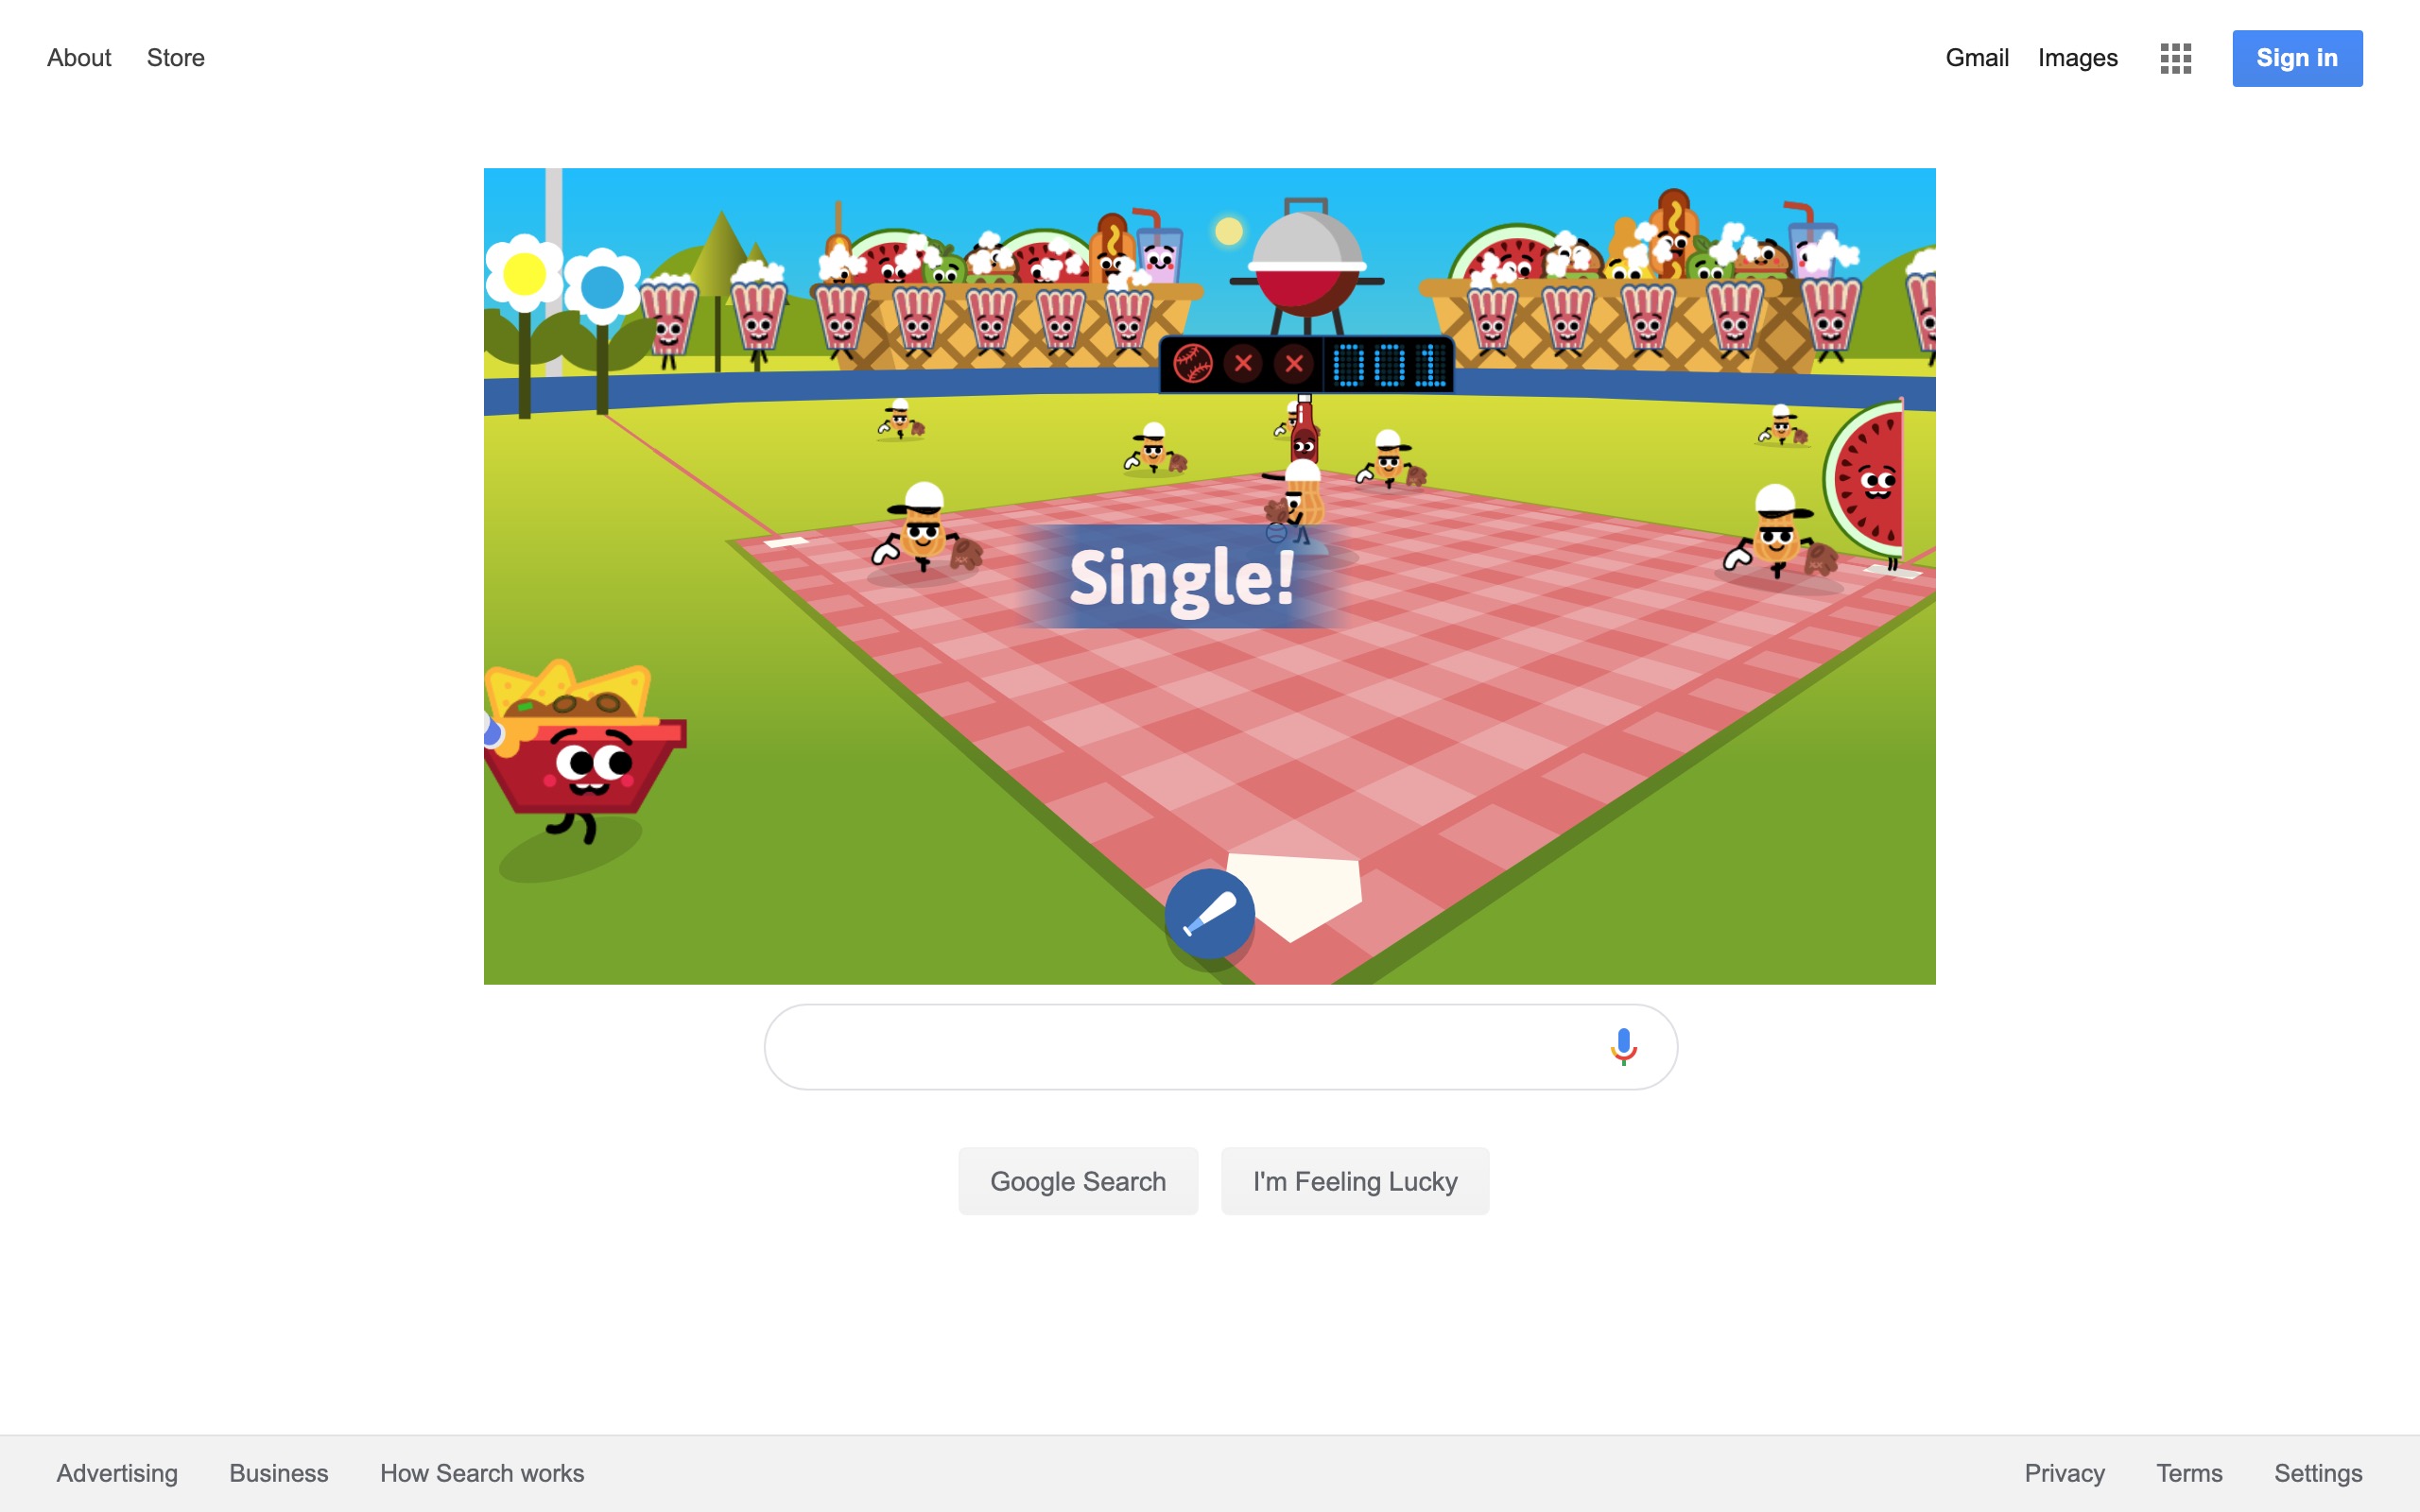 Google's 'Fourth of July' Doodle is a BBQ baseball game 9to5Google